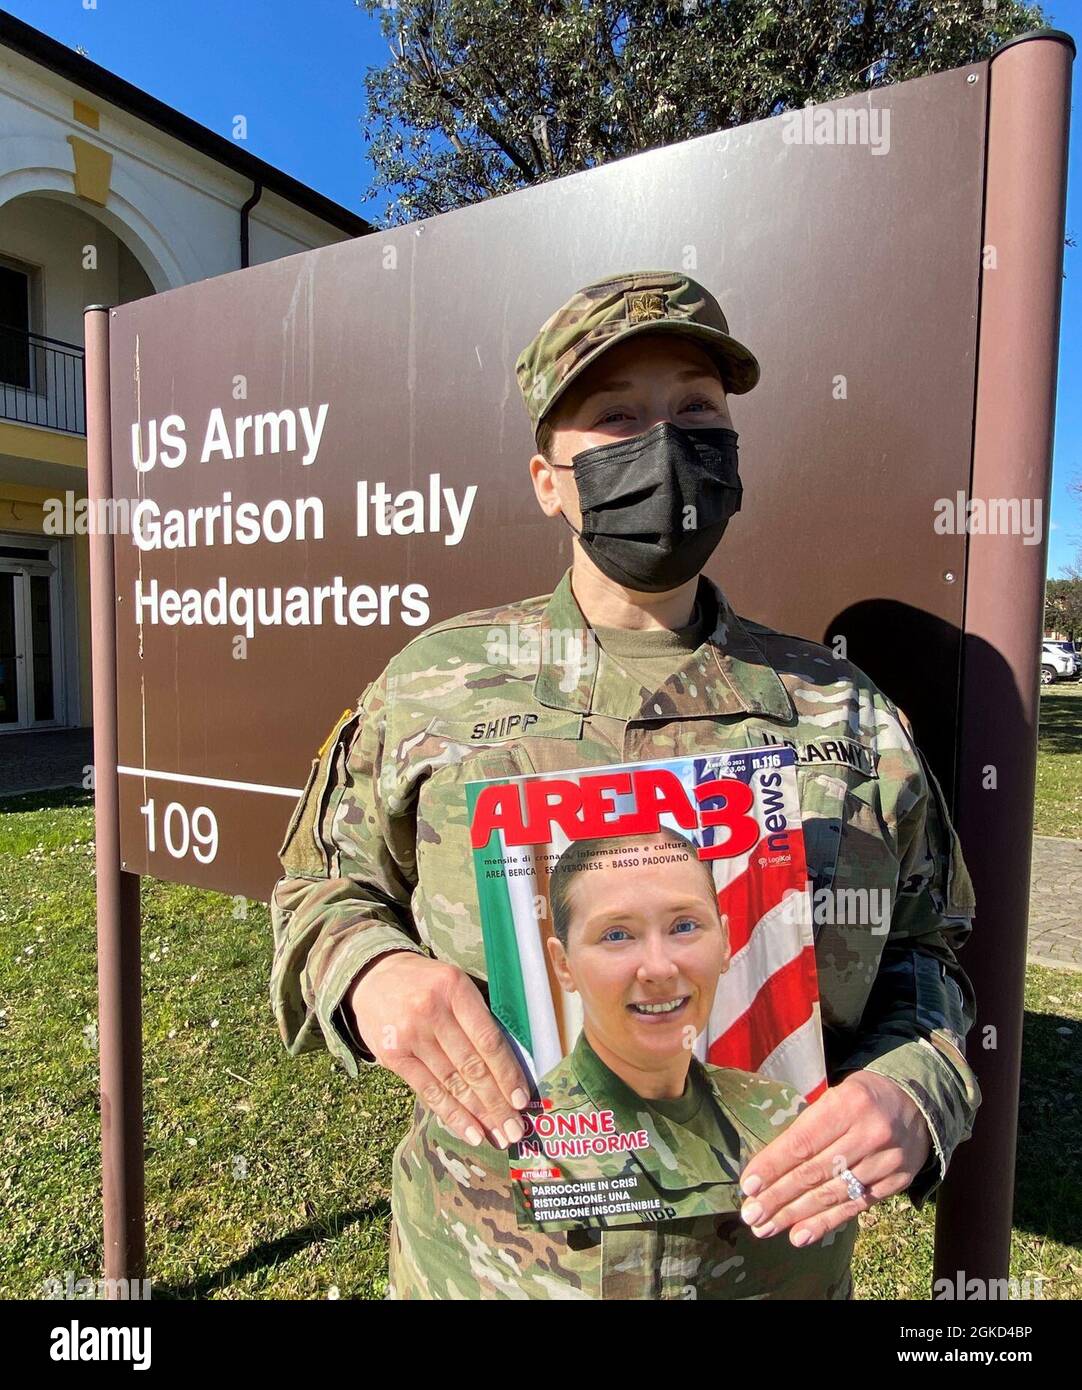 U.S. Army Garrison Italy Executive Officer Maj. Leslie A. Shipp appears on the February 2021 cover issue of the Italian monthly magazine AREA3.  The magazine wrote a feature story on host nation women in the military and two U.S. Army Soldiers from the Vicenza military community who contributed with their experiences in the spirit of integration and partnership with Italian female service members. Stock Photo